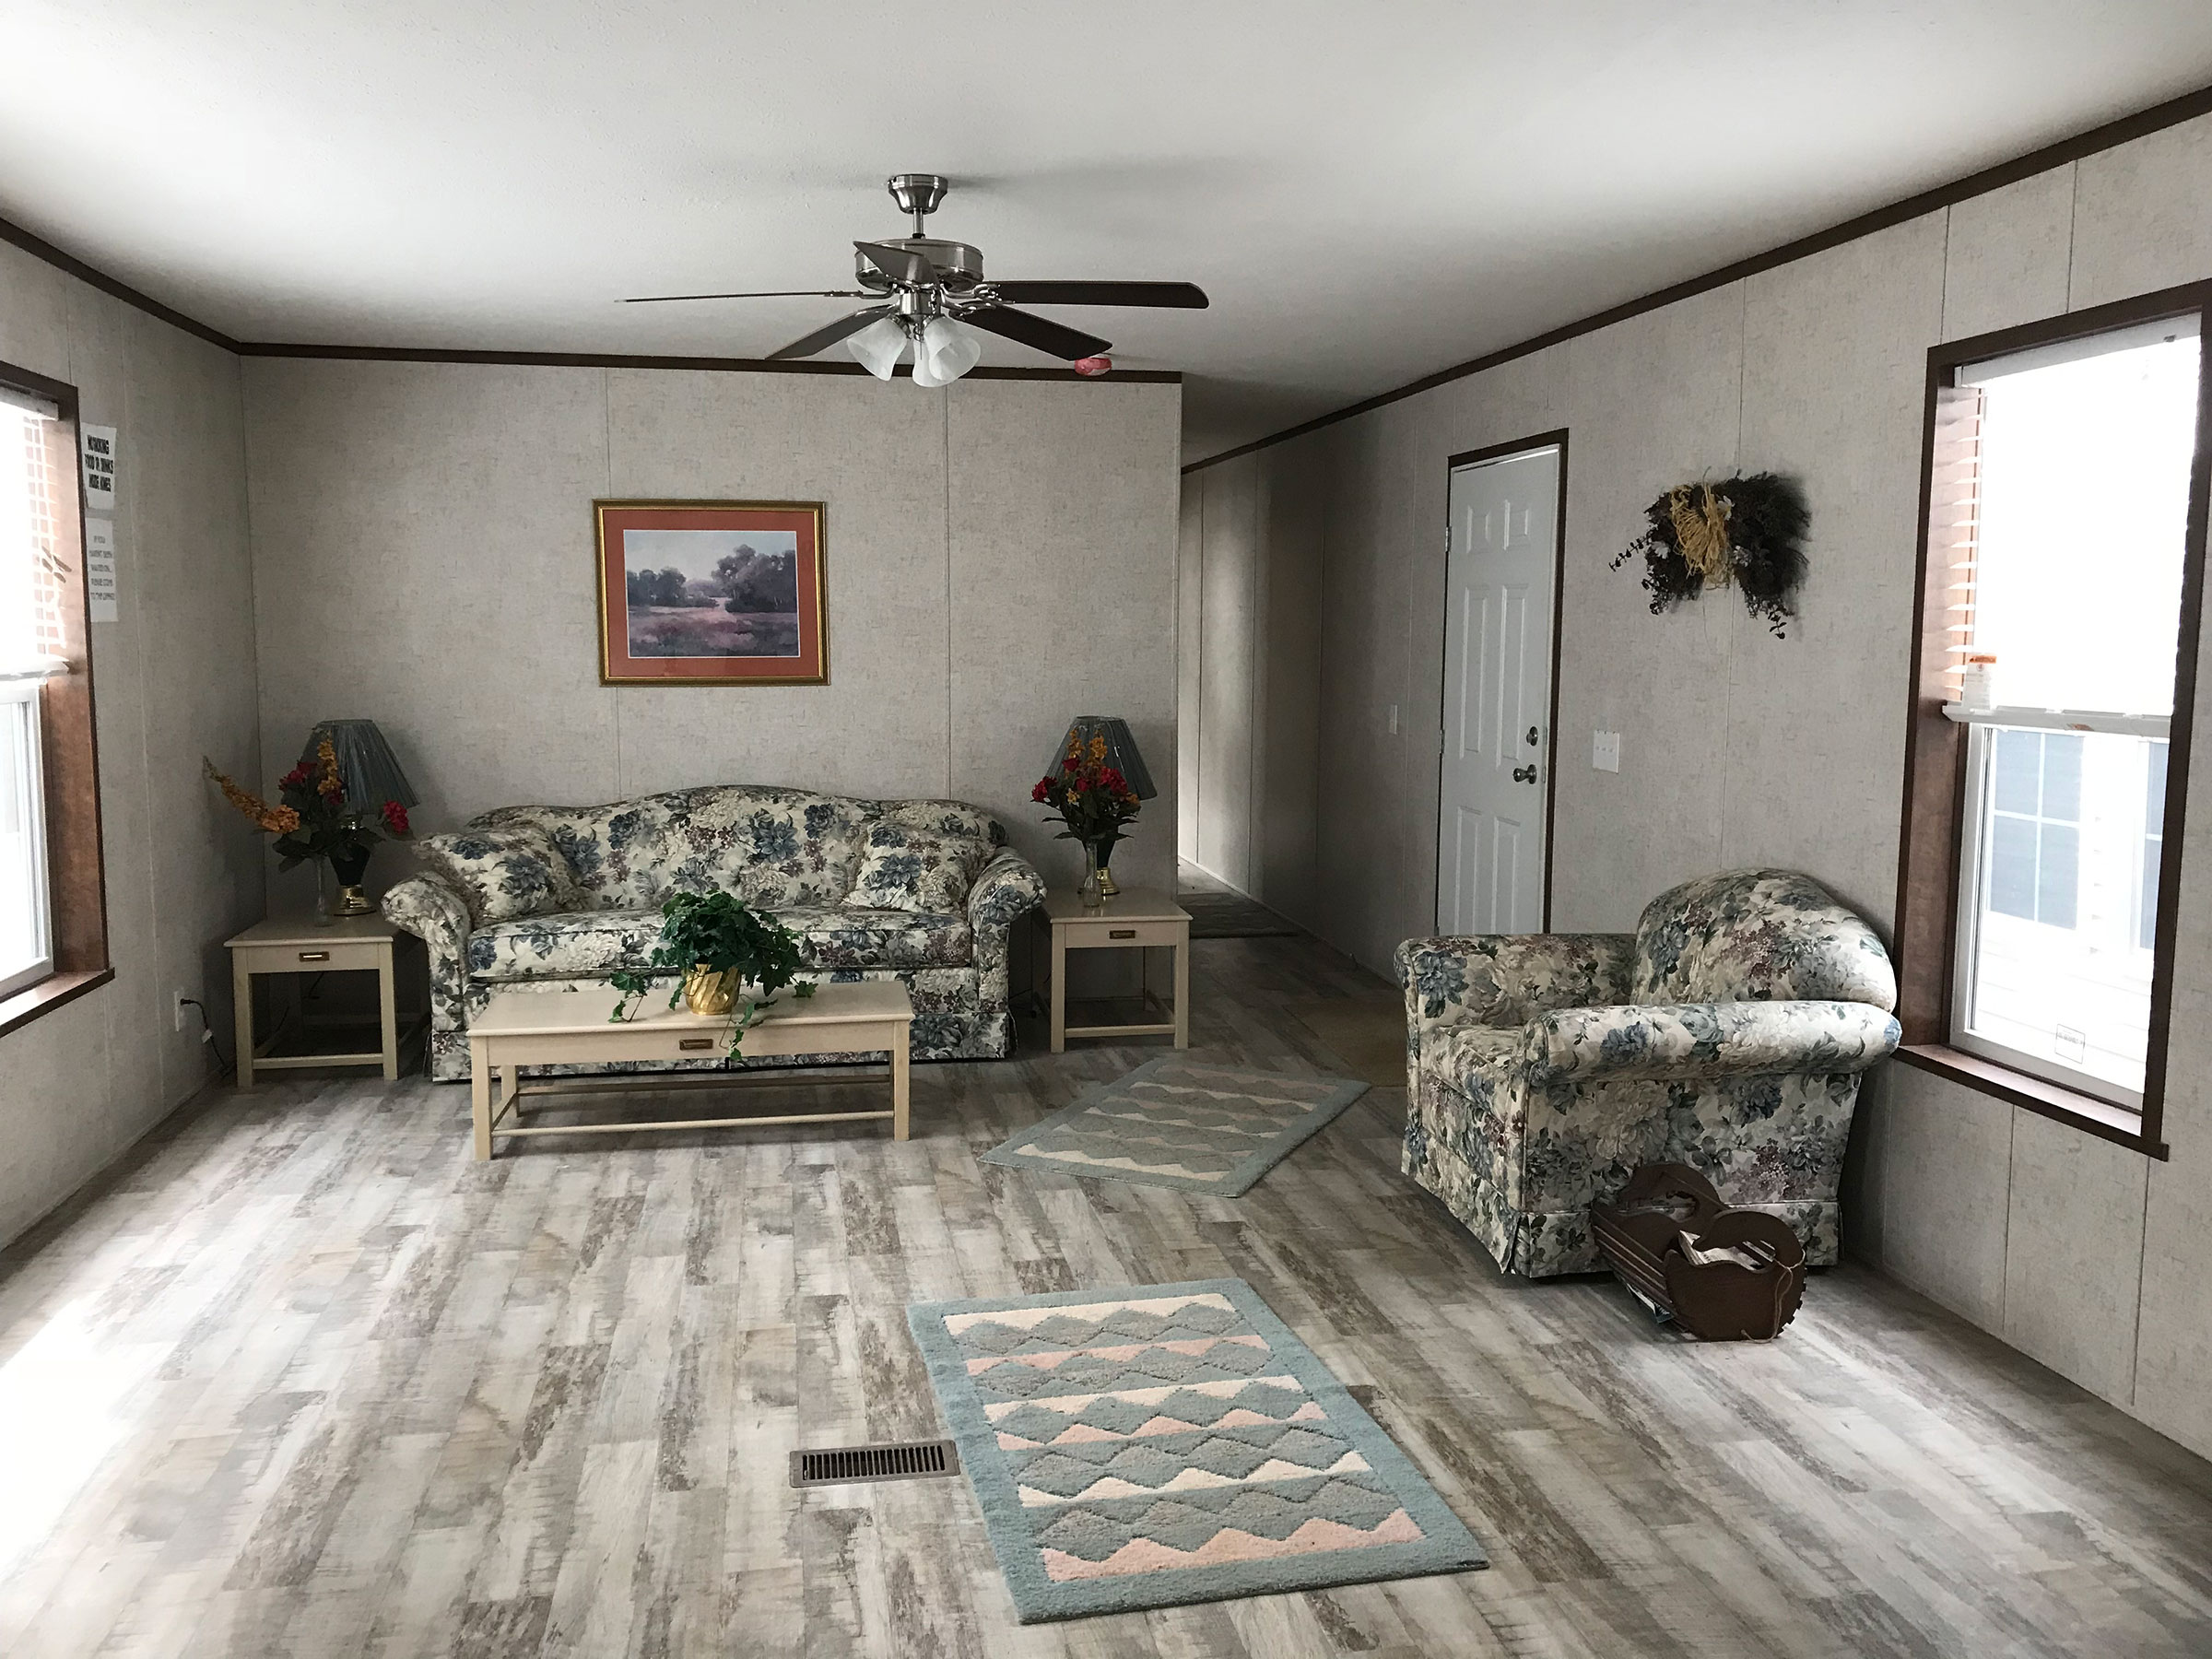 Single Wide Mobile Home Interior Pictures | Review Home Co